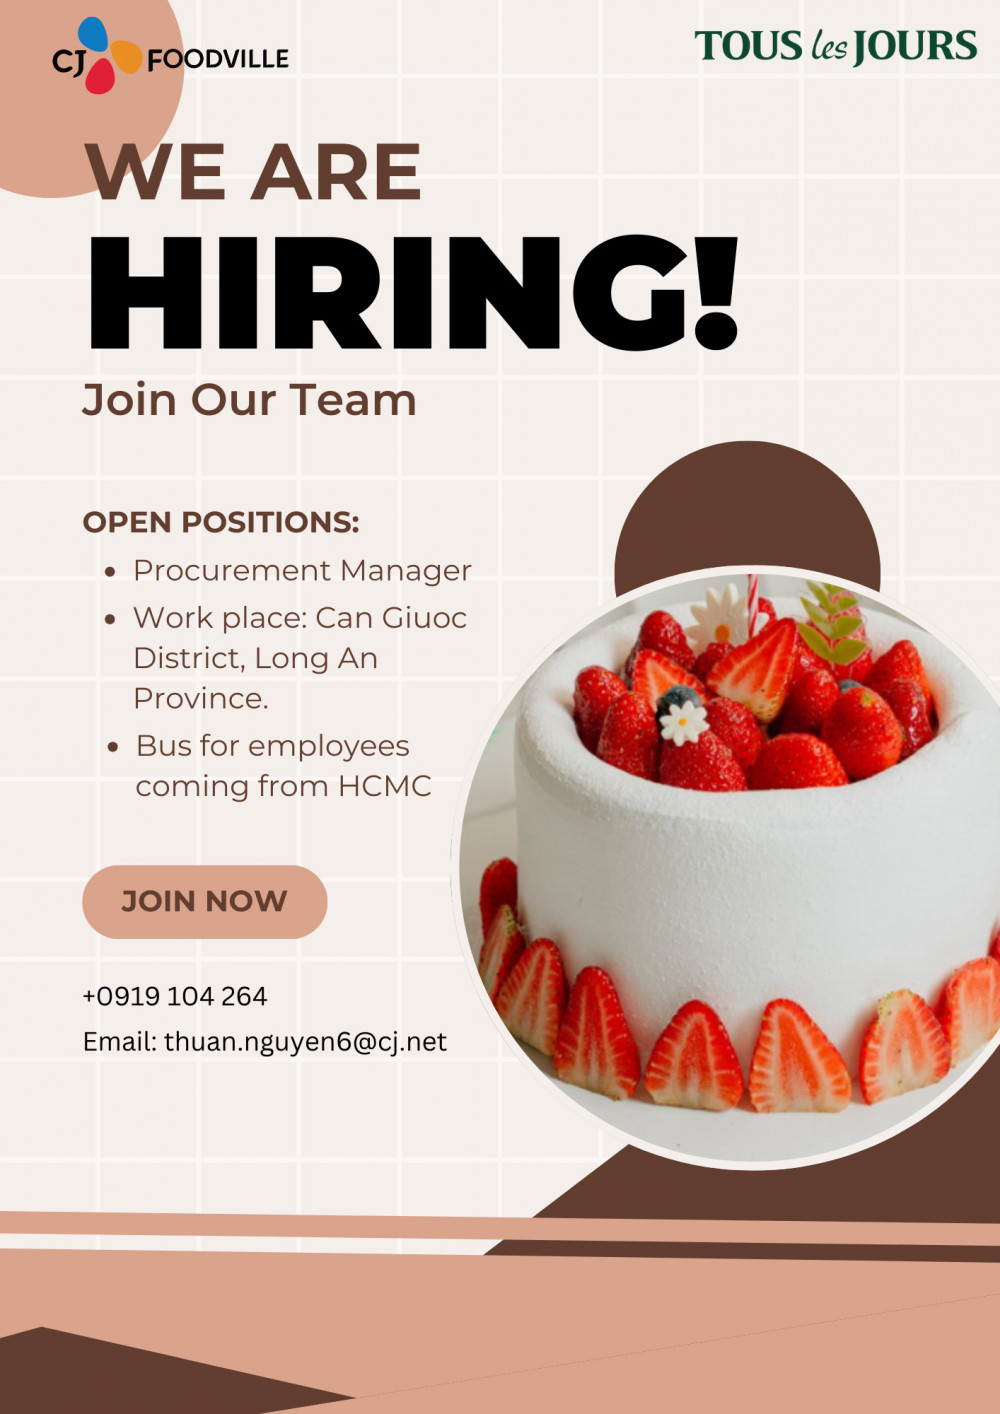 [CJ FOODVILLE Long An] We're hiring for the position of Procurement Manager.